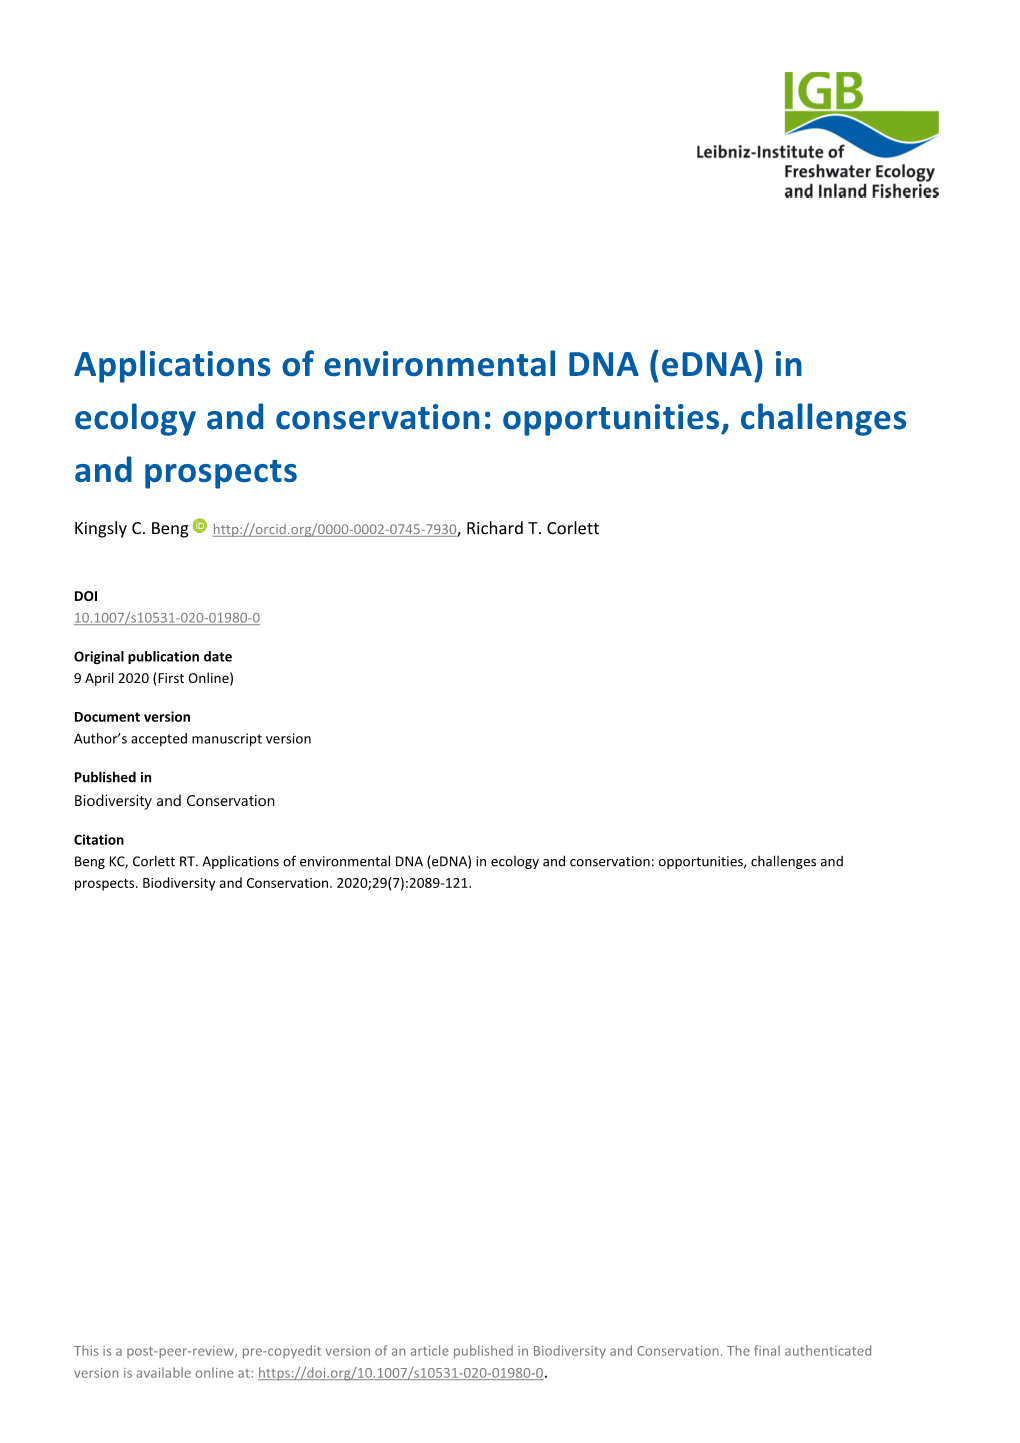 Applications of Environmental DNA (Edna) in Ecology and Conservation: Opportunities, Challenges and Prospects